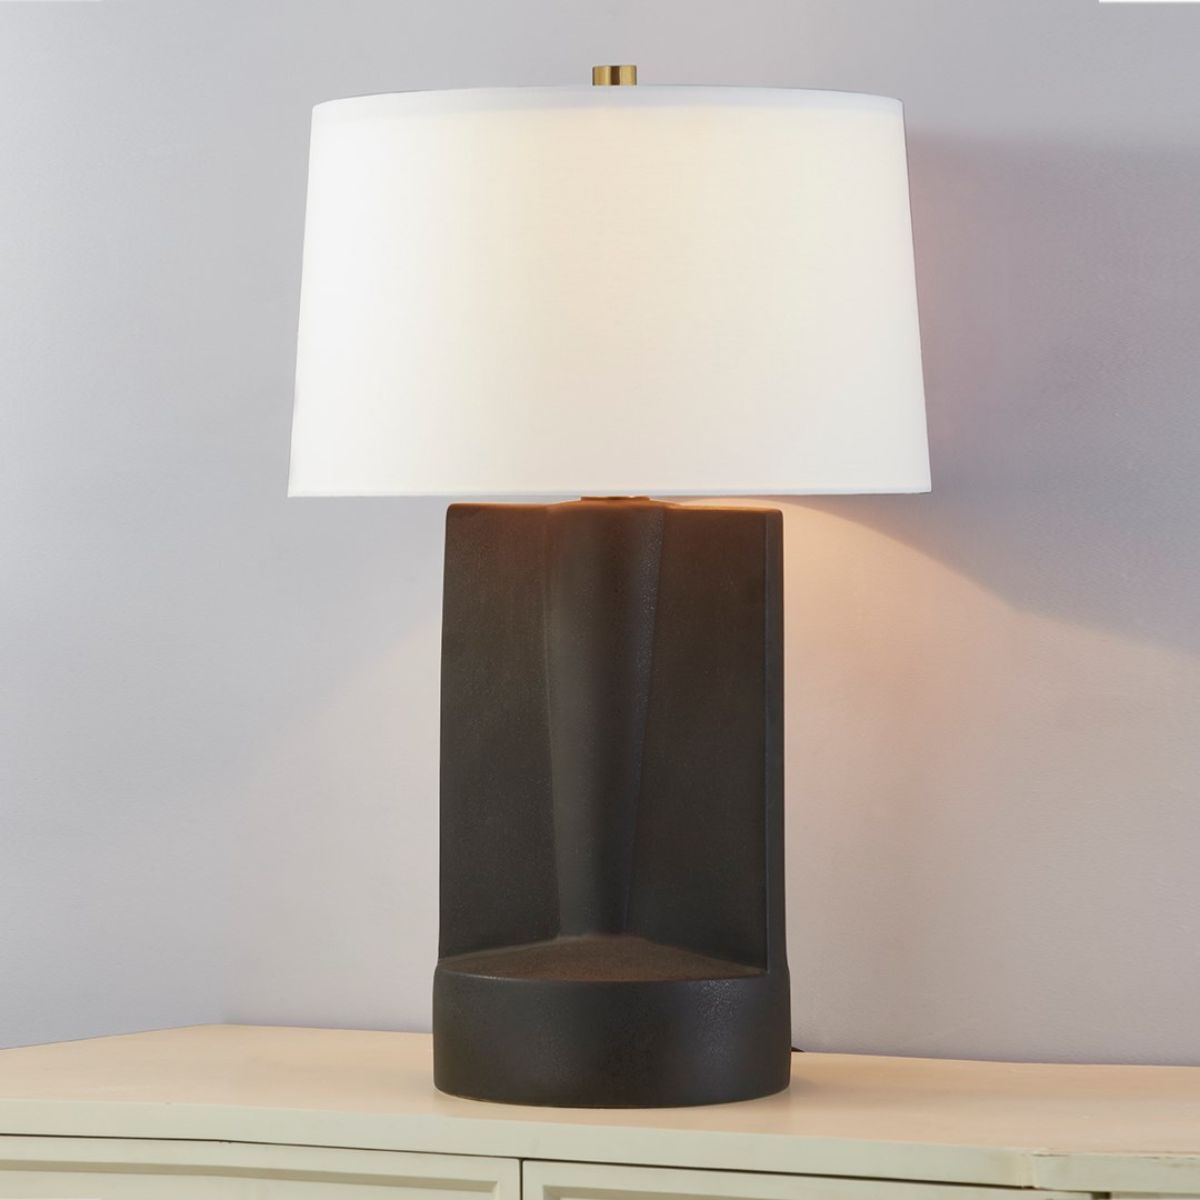 Wilson Table Lamp Ceramic Textured Dark Grey with Aged Brass Accents